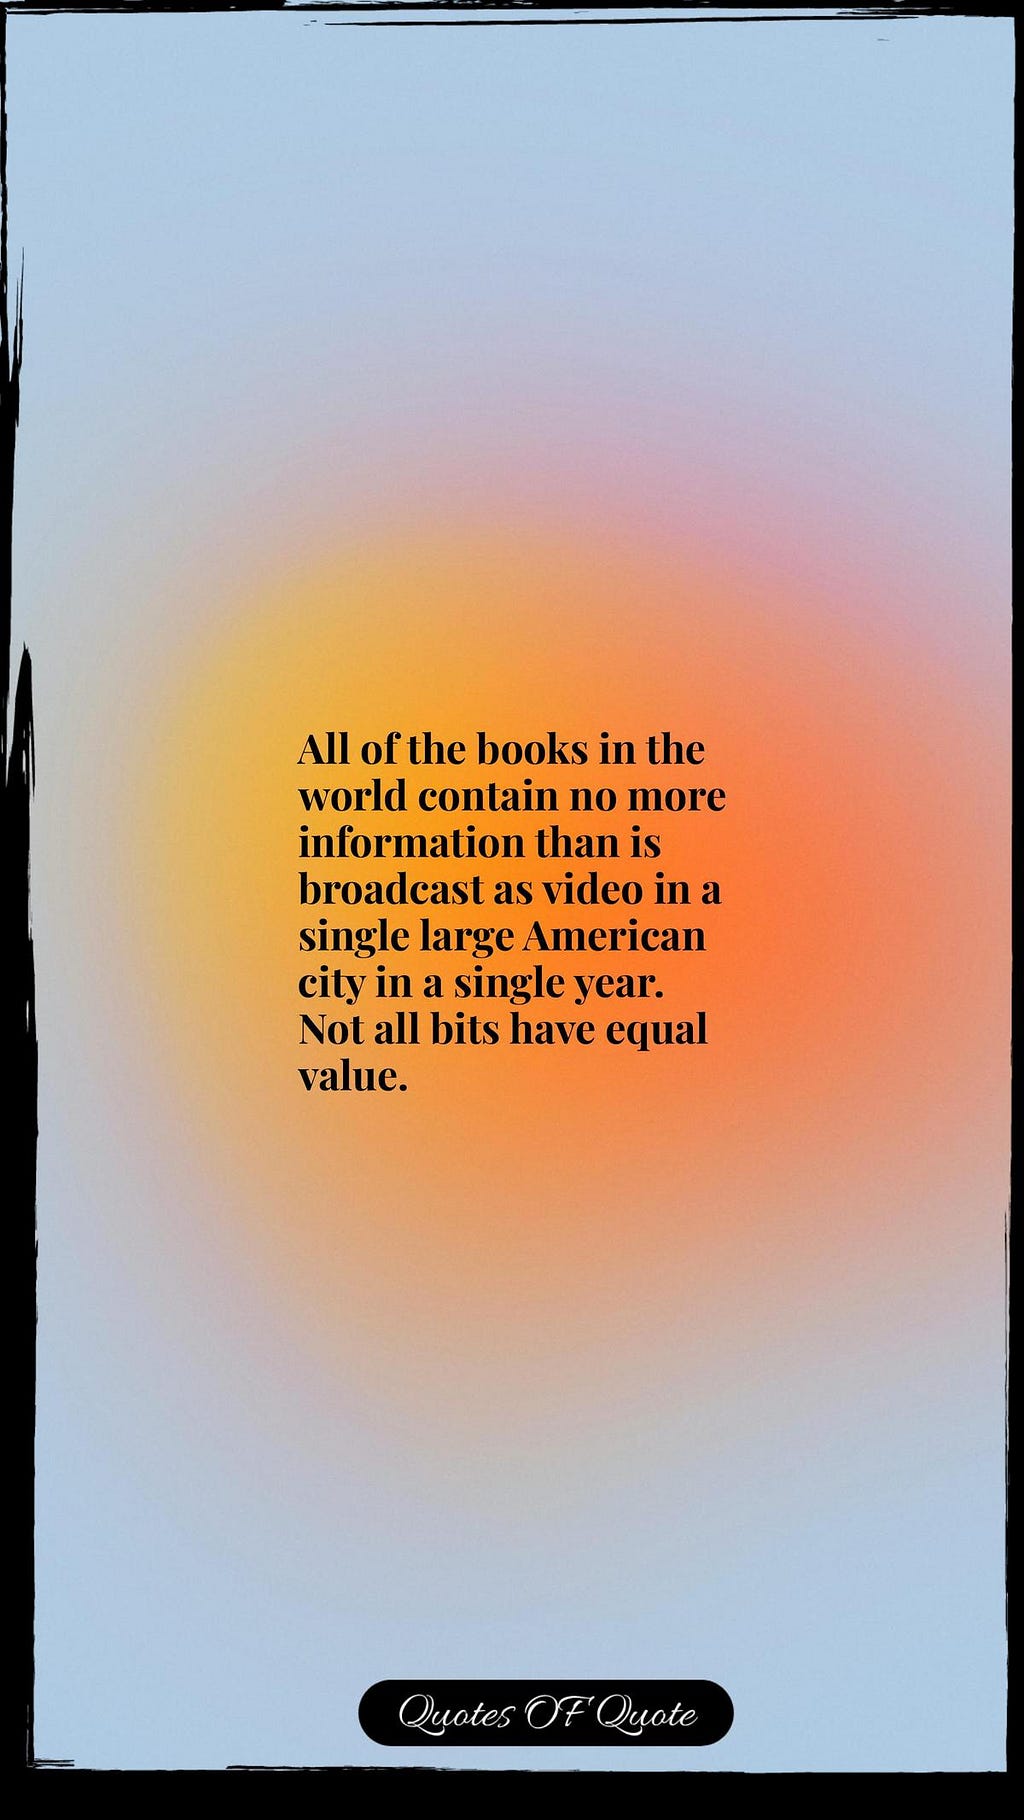 All of the books in the world contain no more information than is broadcast as video in a single large American city in a single year. Not all bits have equal value.